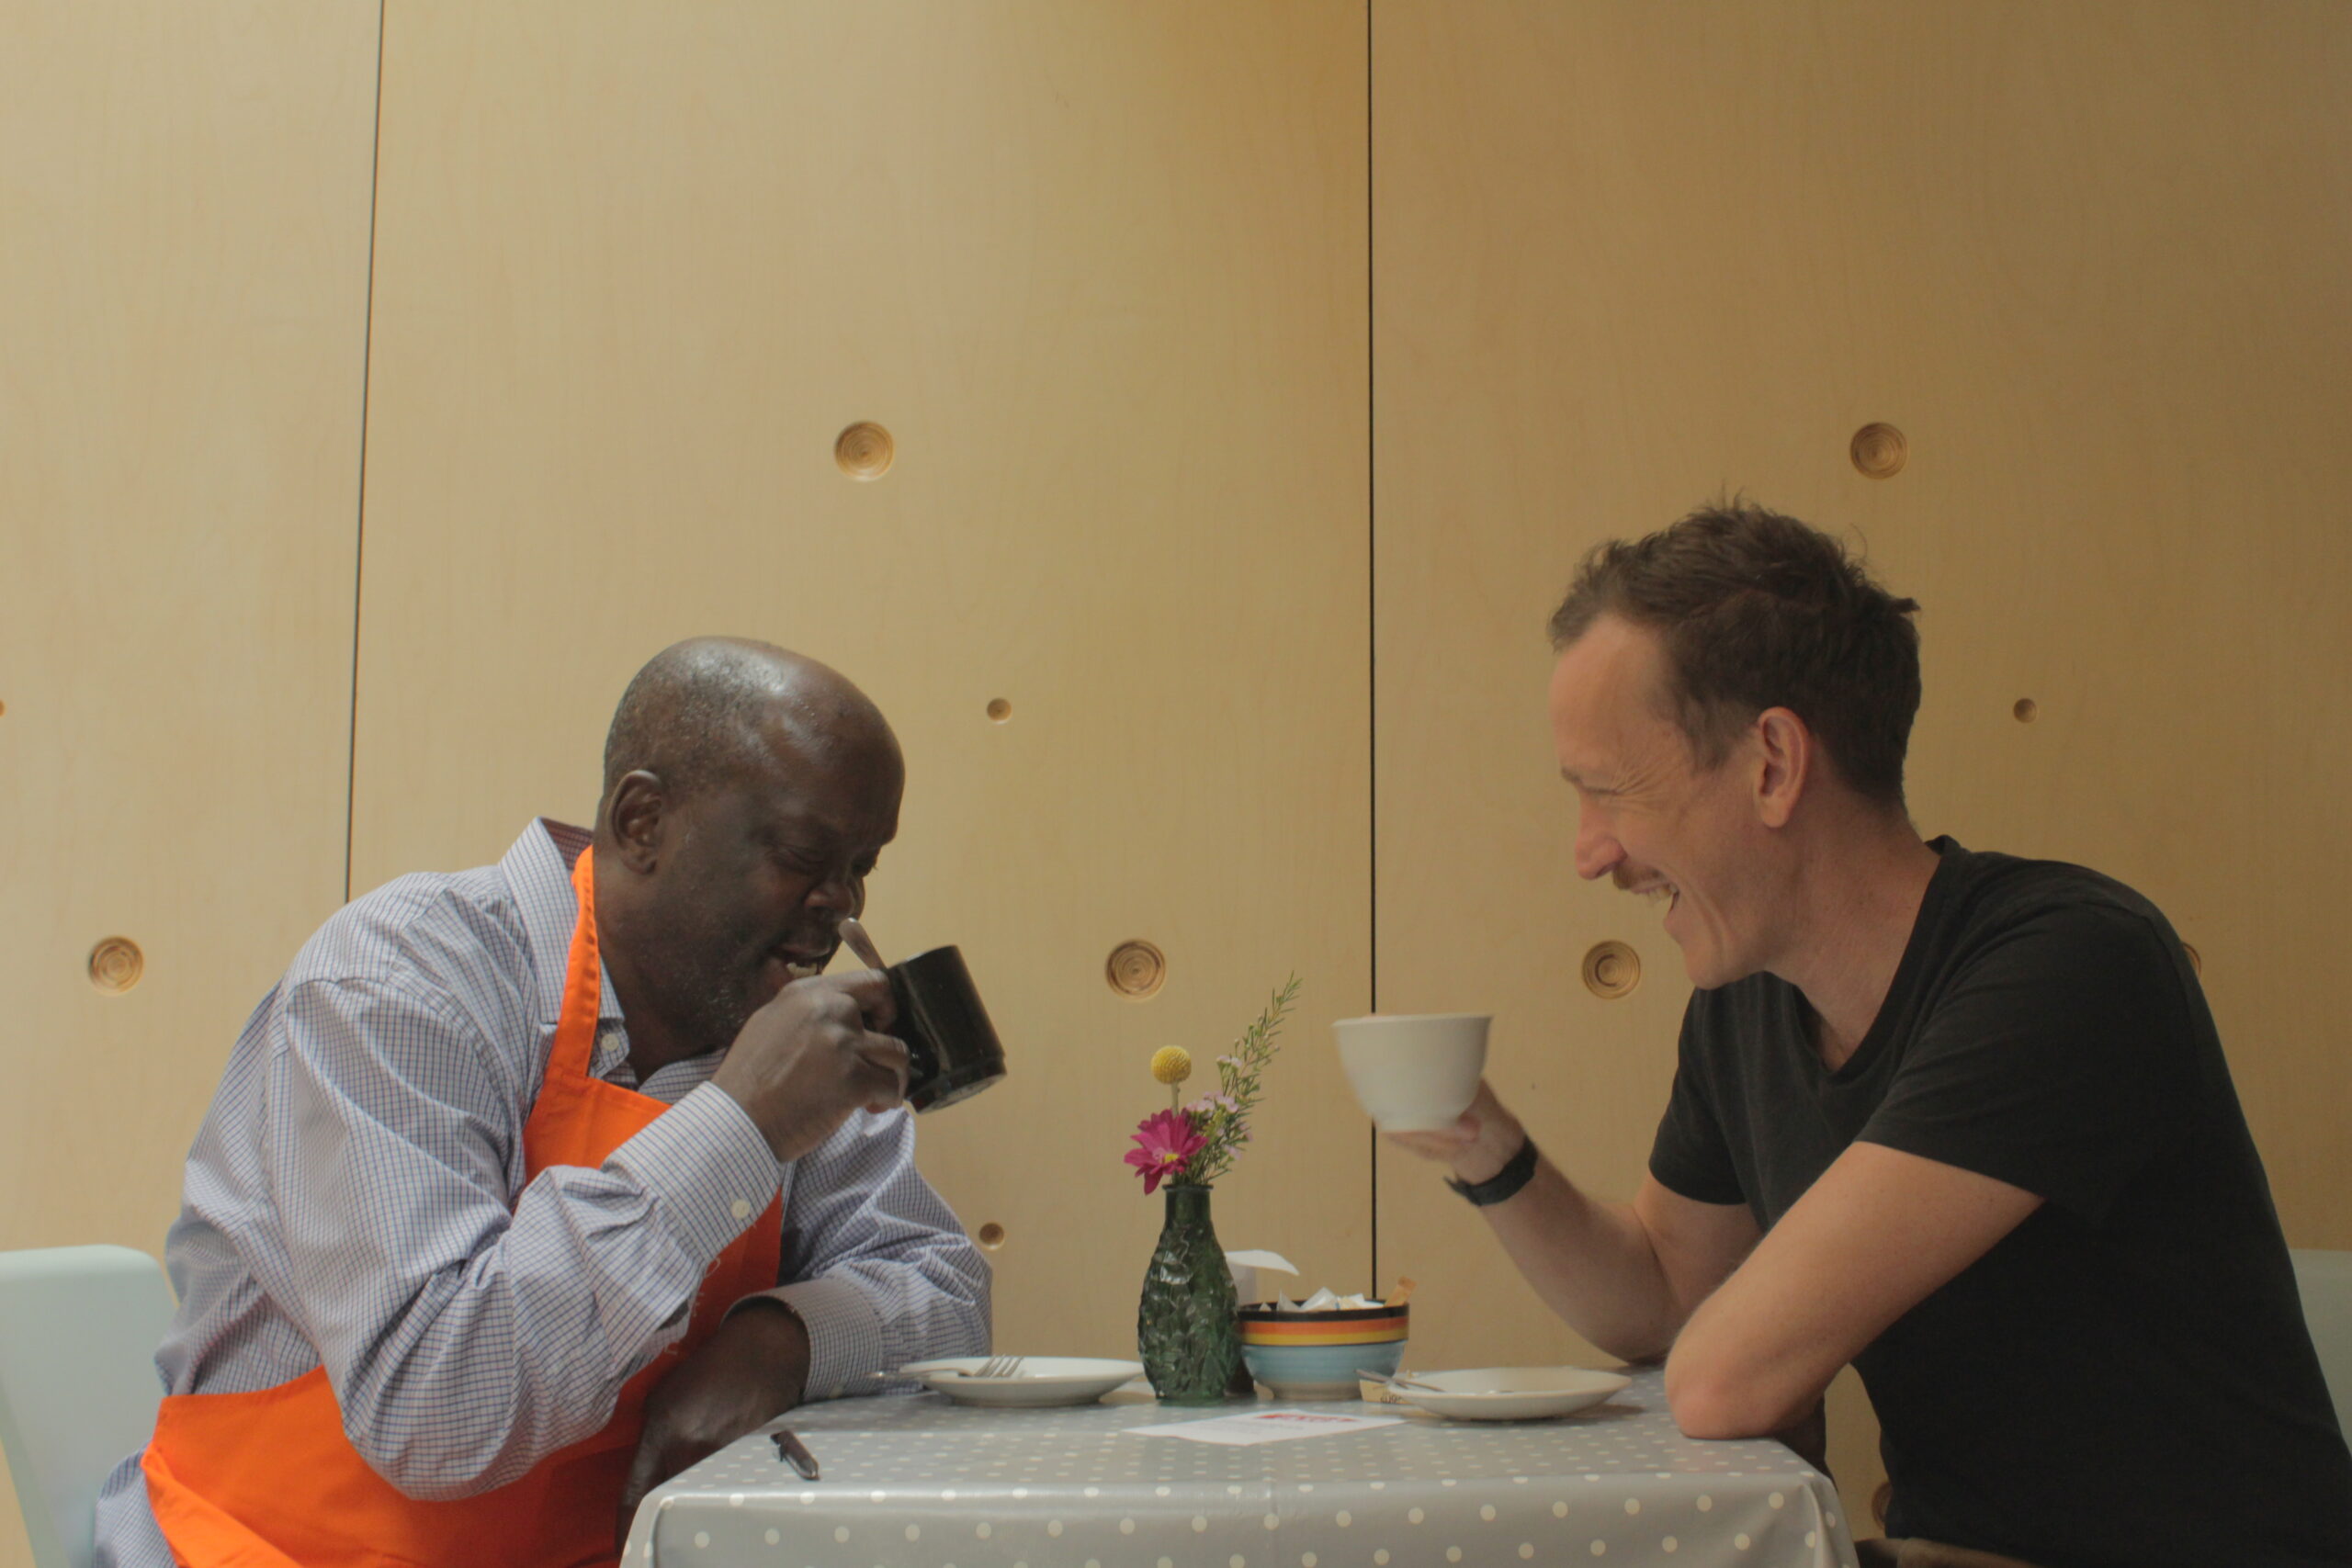 a Black man in an orange apron sitting at a table with a cup of coffee and a white man with a moustache laughing